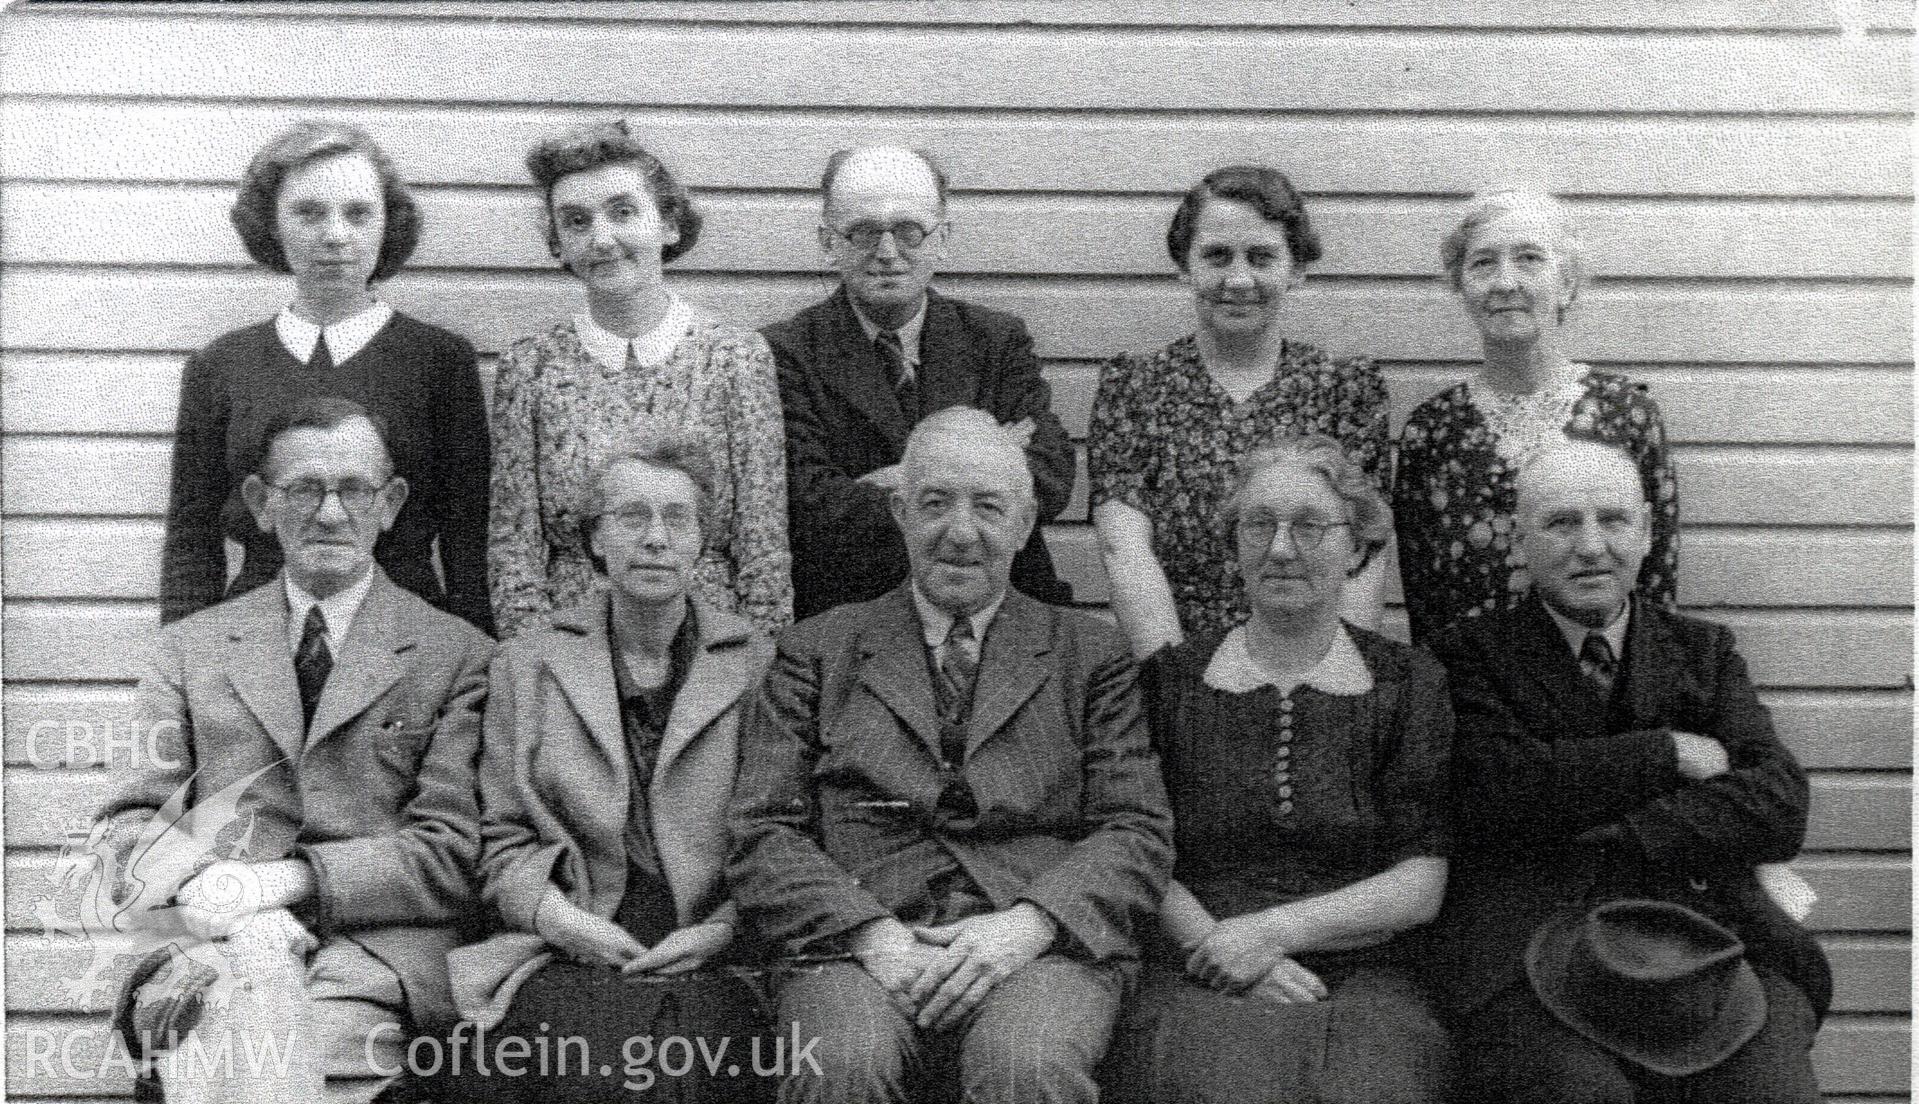 Black and white photograph of members of Bethania Chapel's congregation. Donated to the RCAHMW by Cyril Philips as part of the Digital Dissent Project.